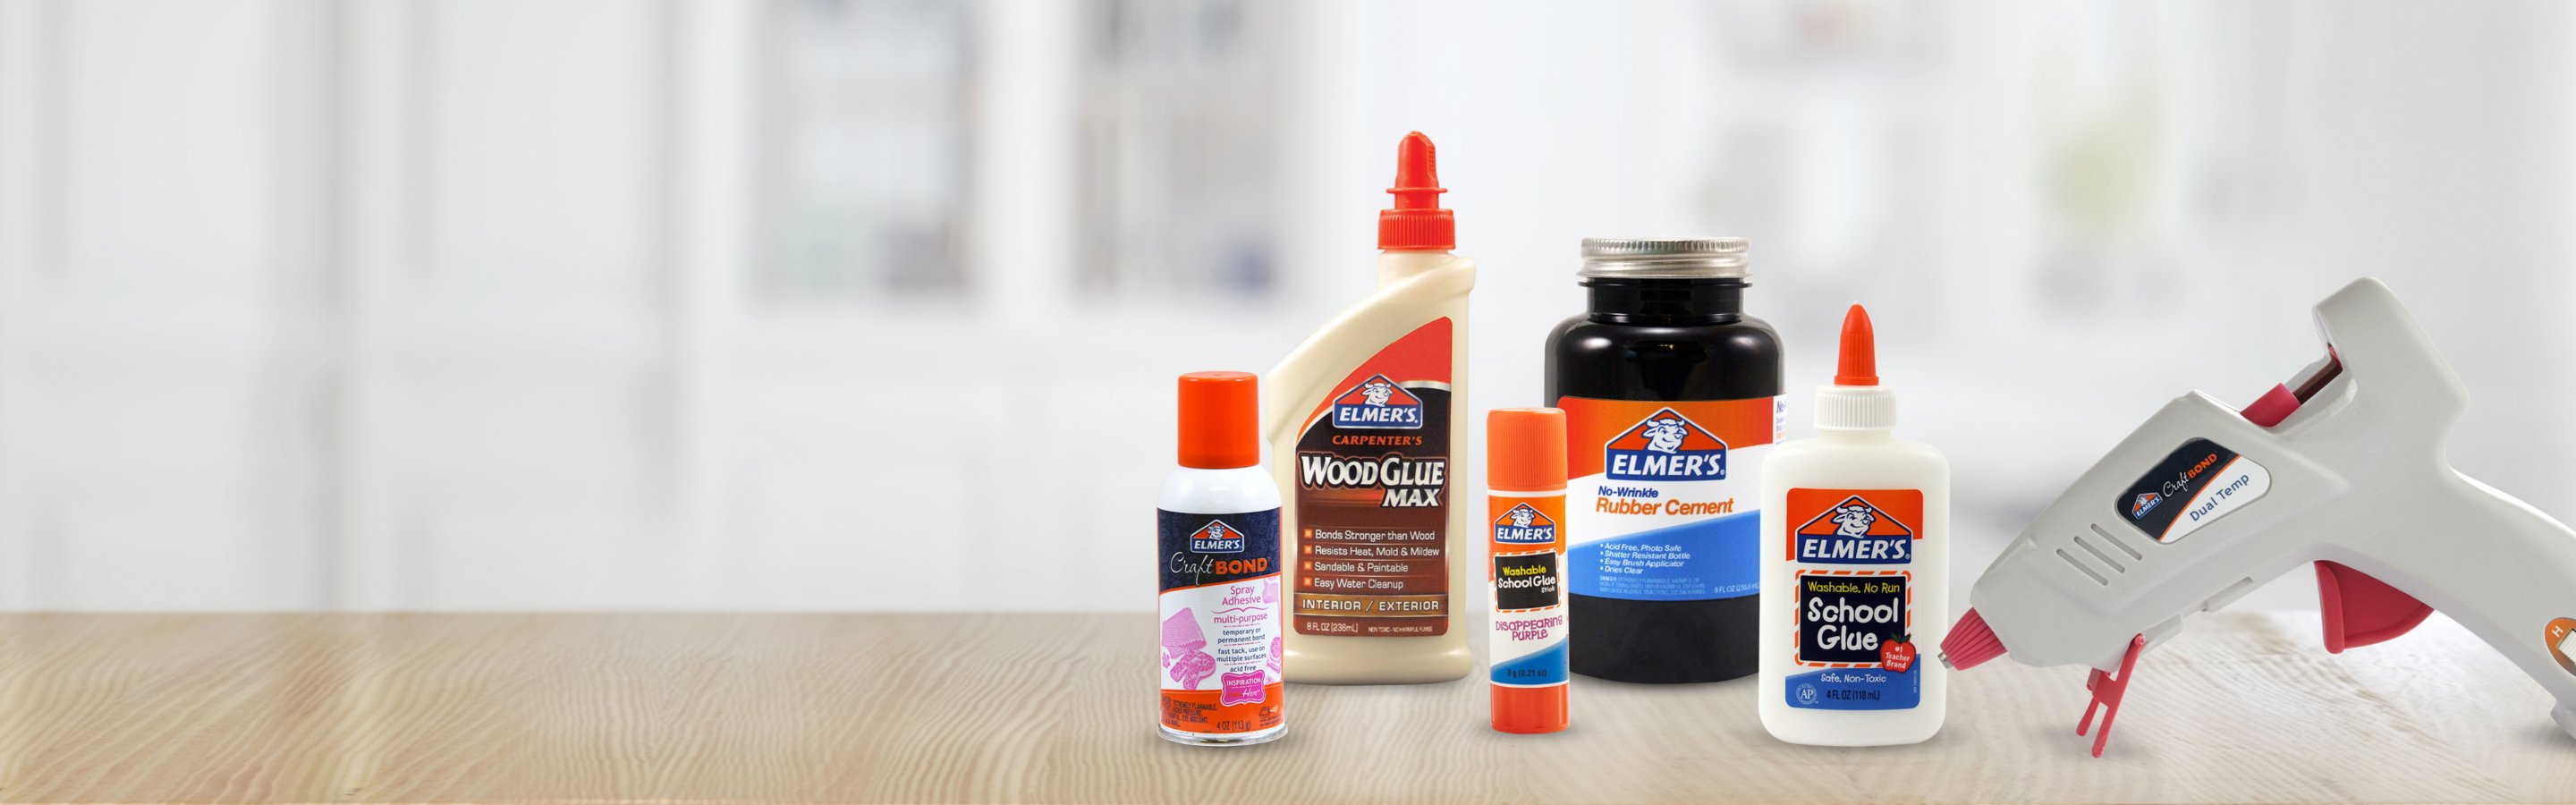 assorted glue products